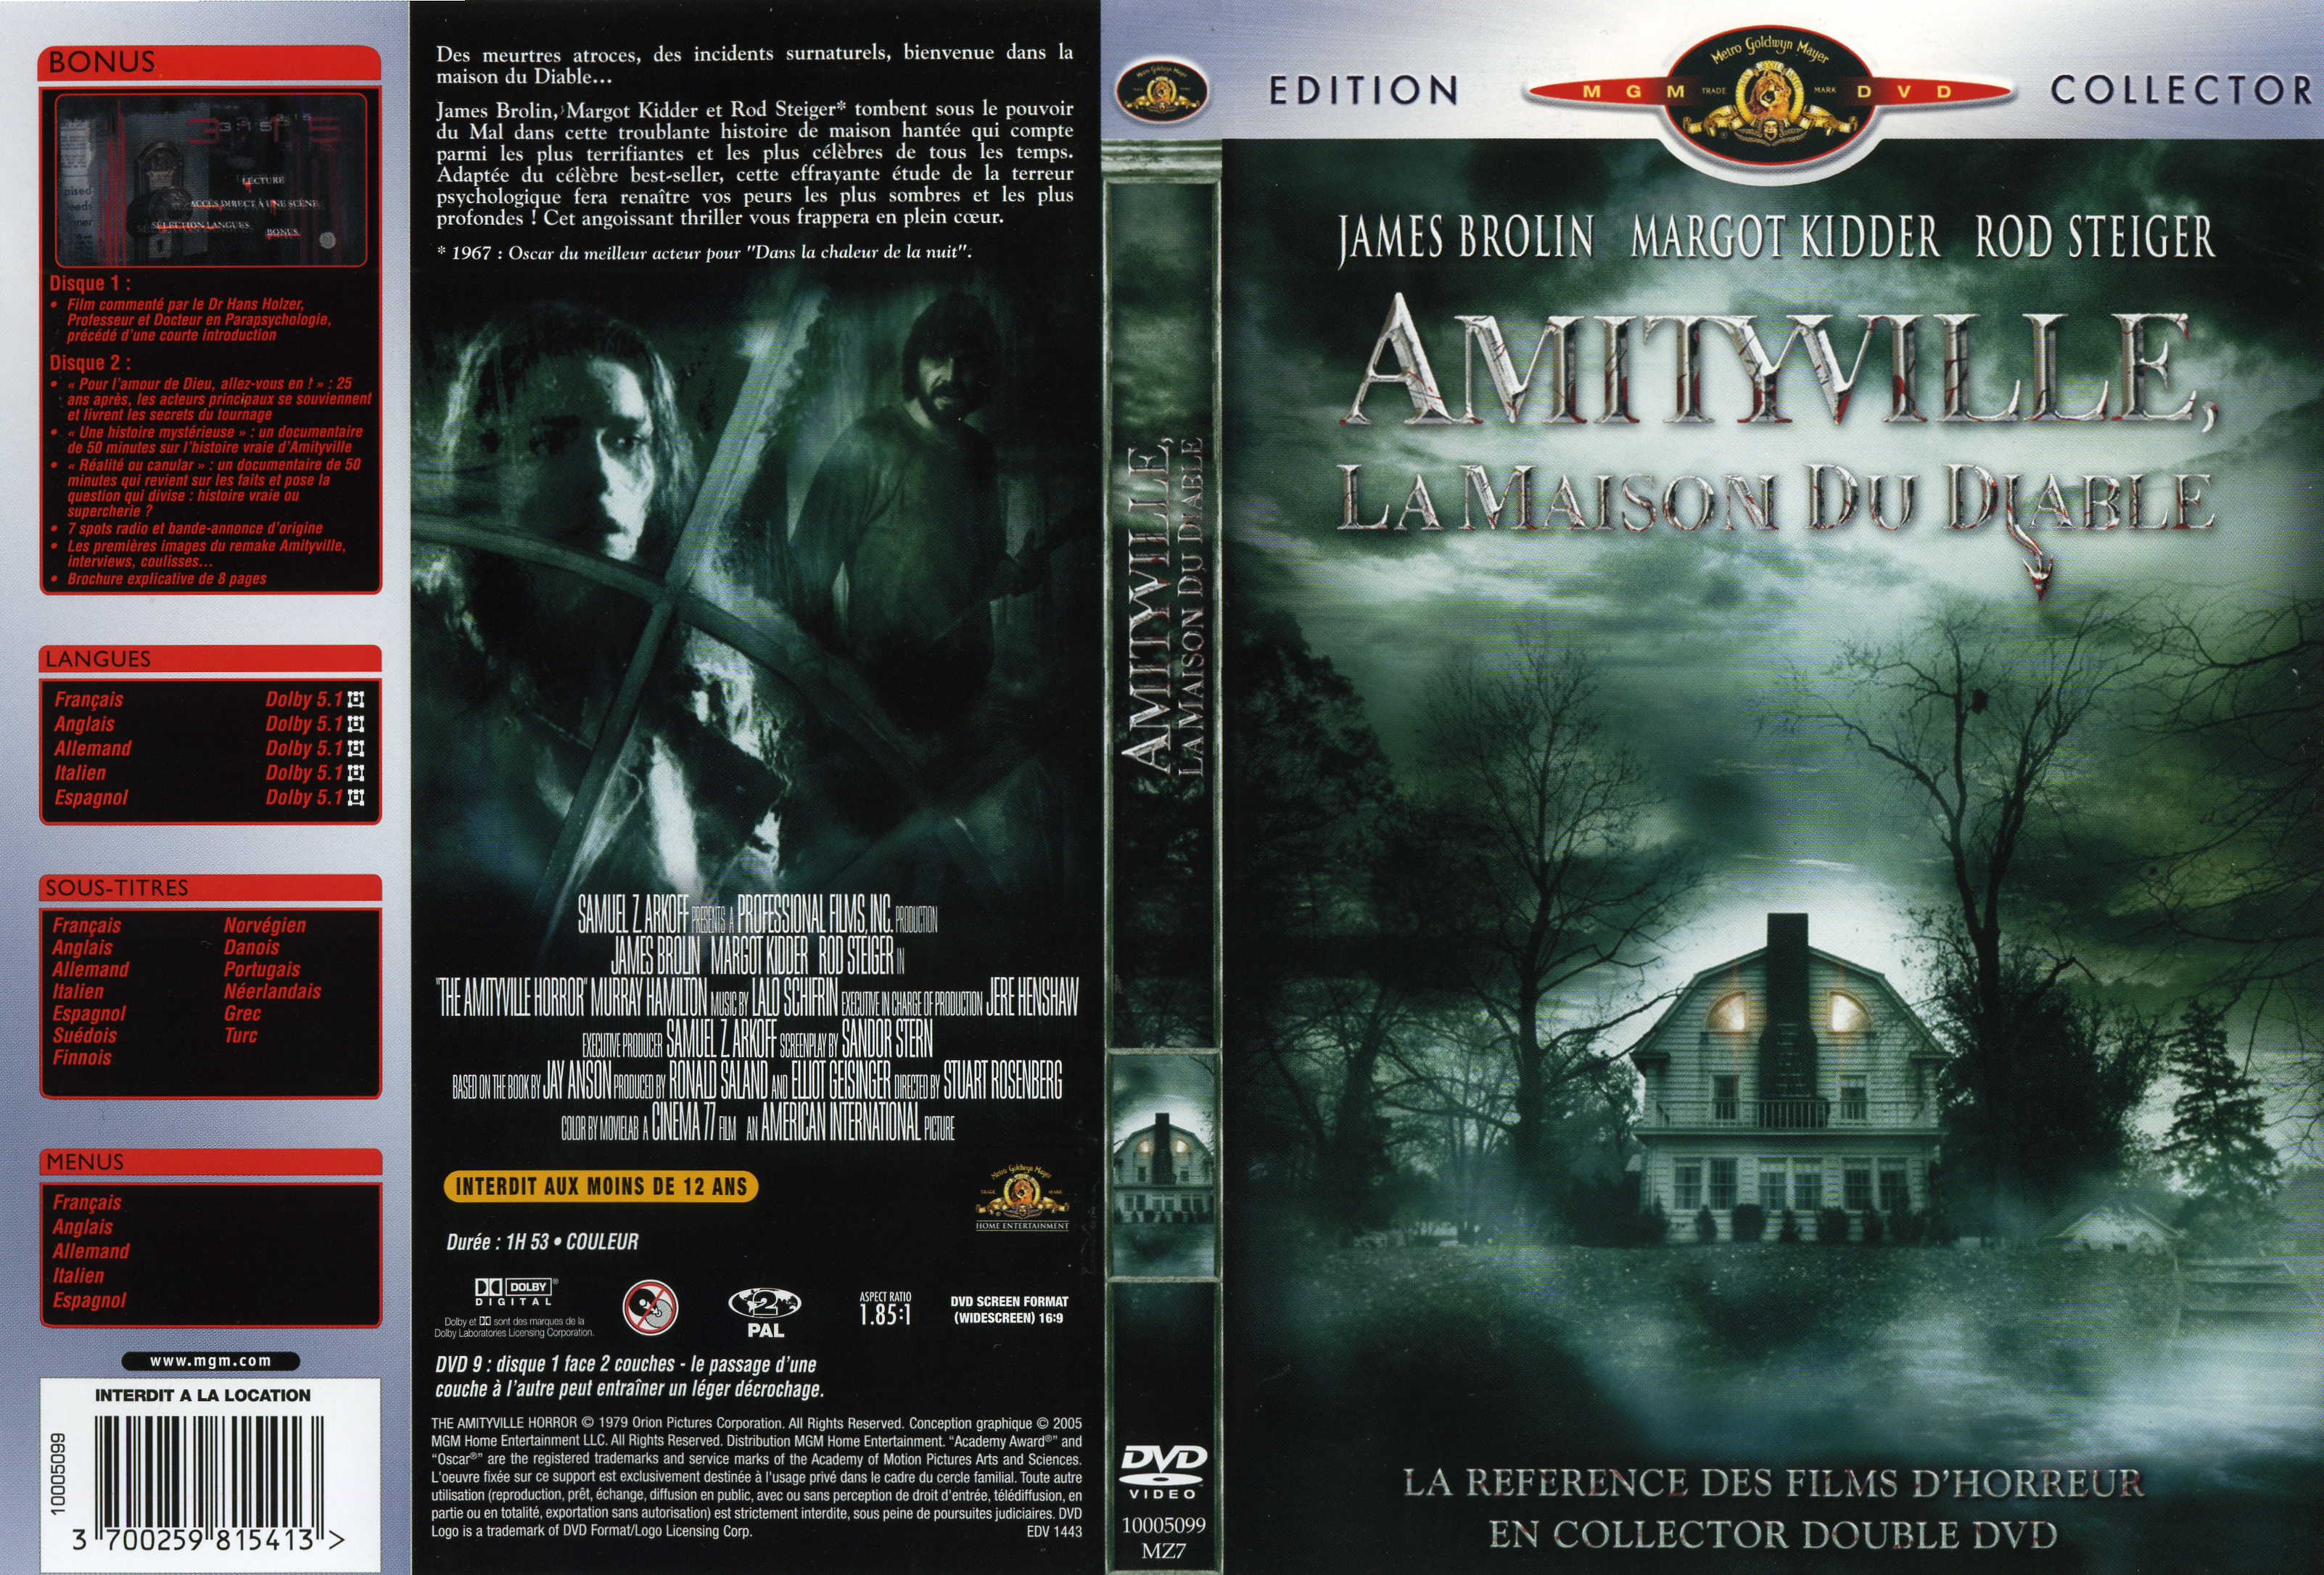 Jaquette DVD Amityville v2